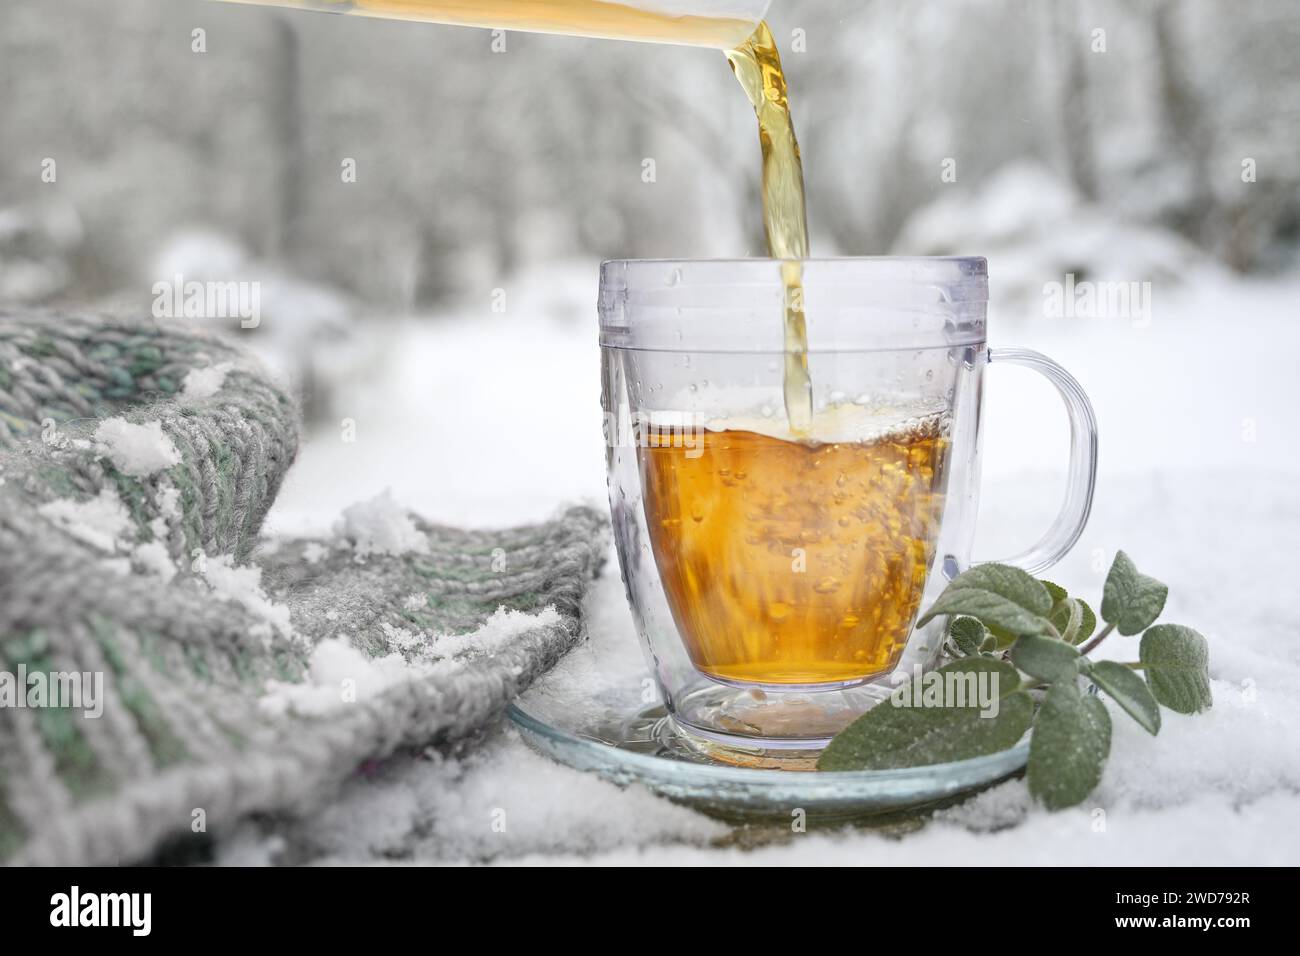 Hot herbal tea is poured in a glass cup outdoors in the snow, beside some sage leaves and a knitted scarf, medicinal herbs and home remedies against f Stock Photo